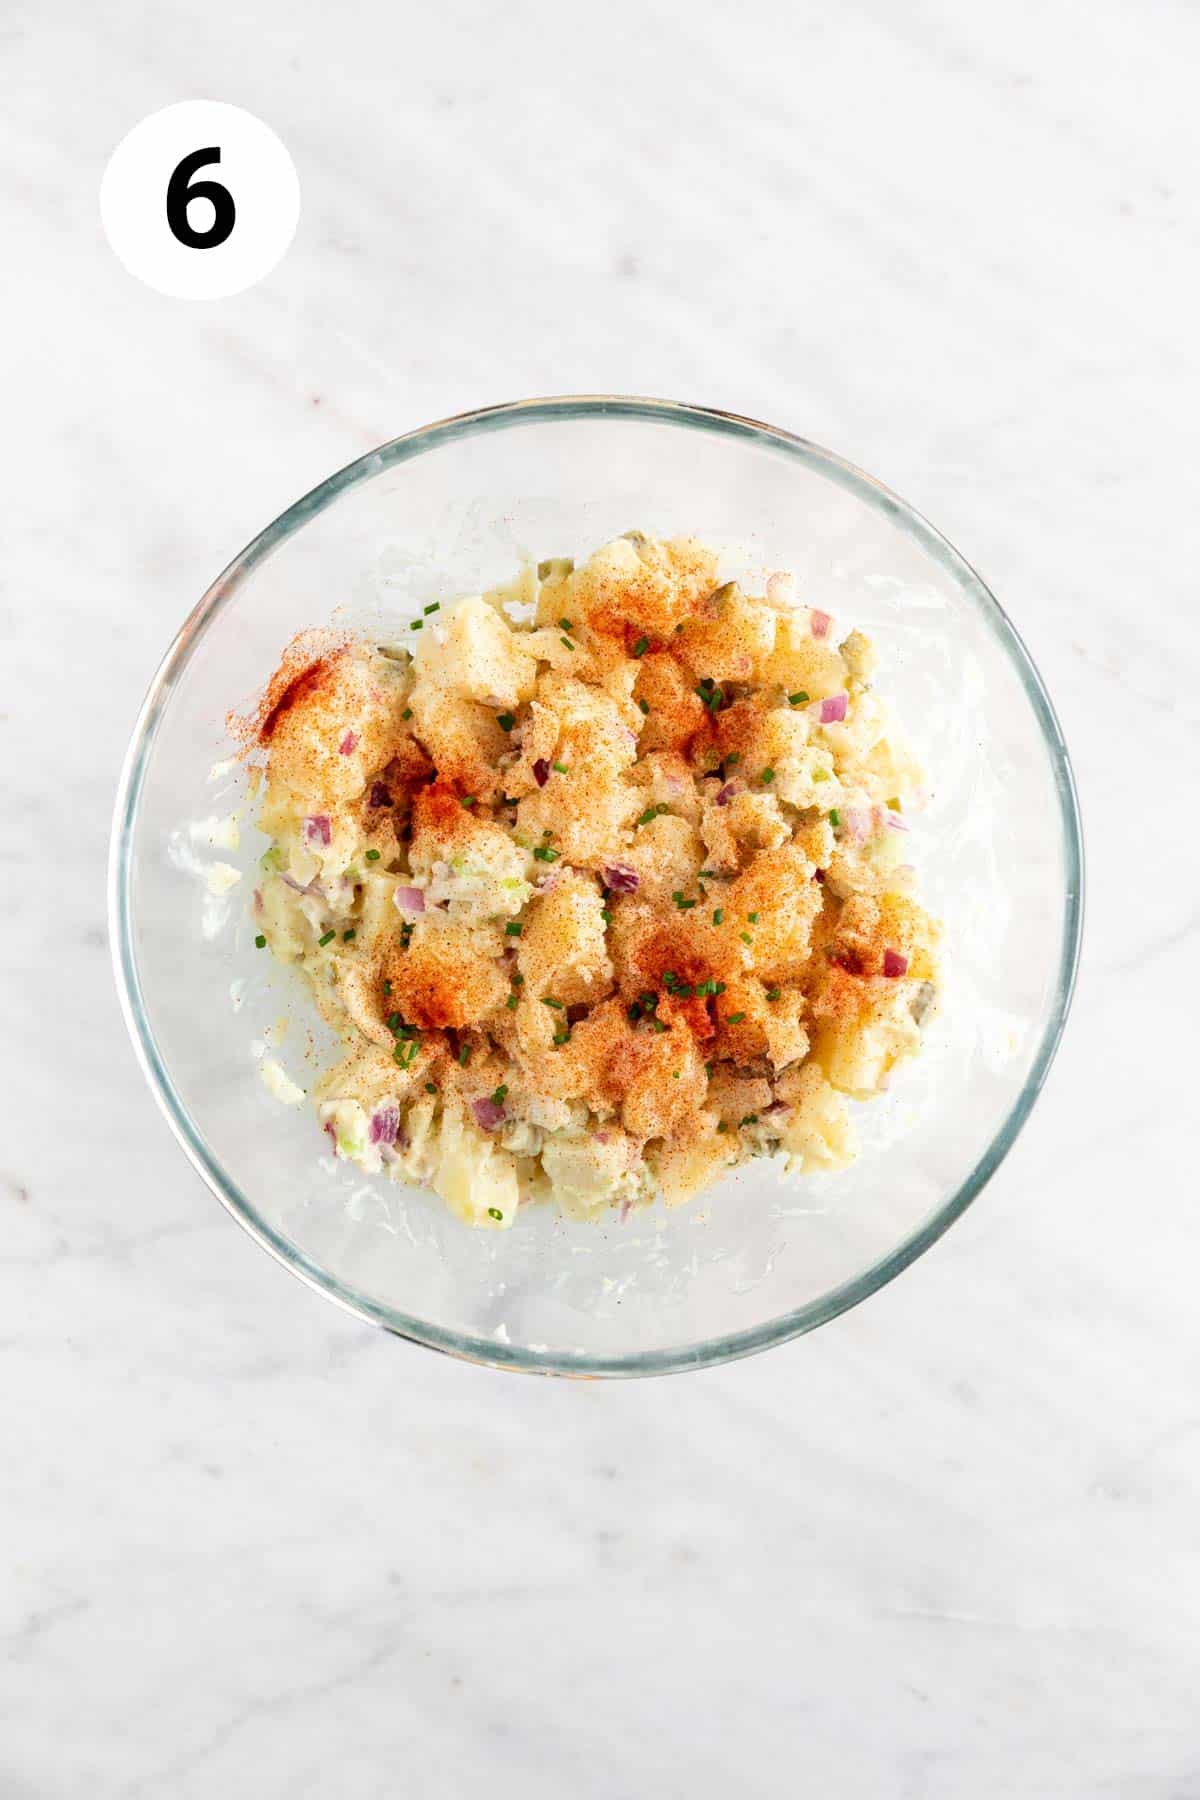 Bowl of vegan potato salad garnished with paprika and chives.